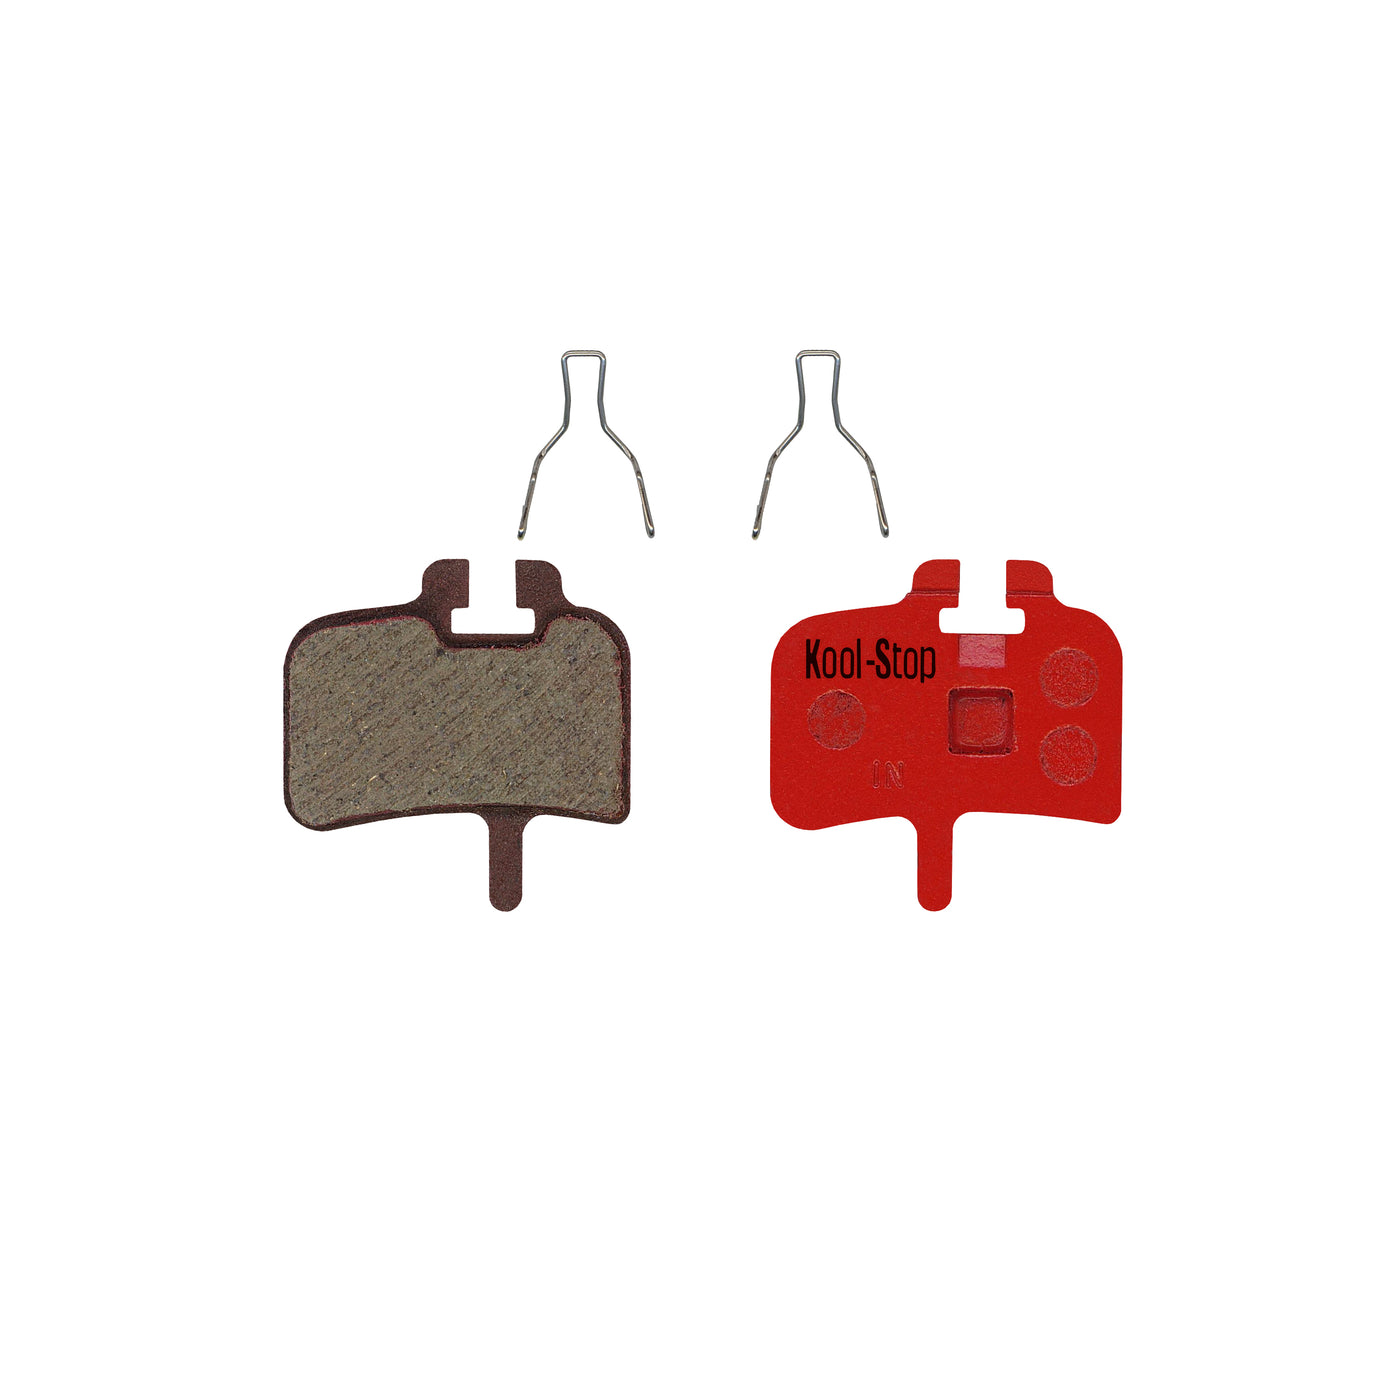 Kool-Stop Brake Pad for Hayes Promax Hyd/Mech, Organic - Cyclop.in